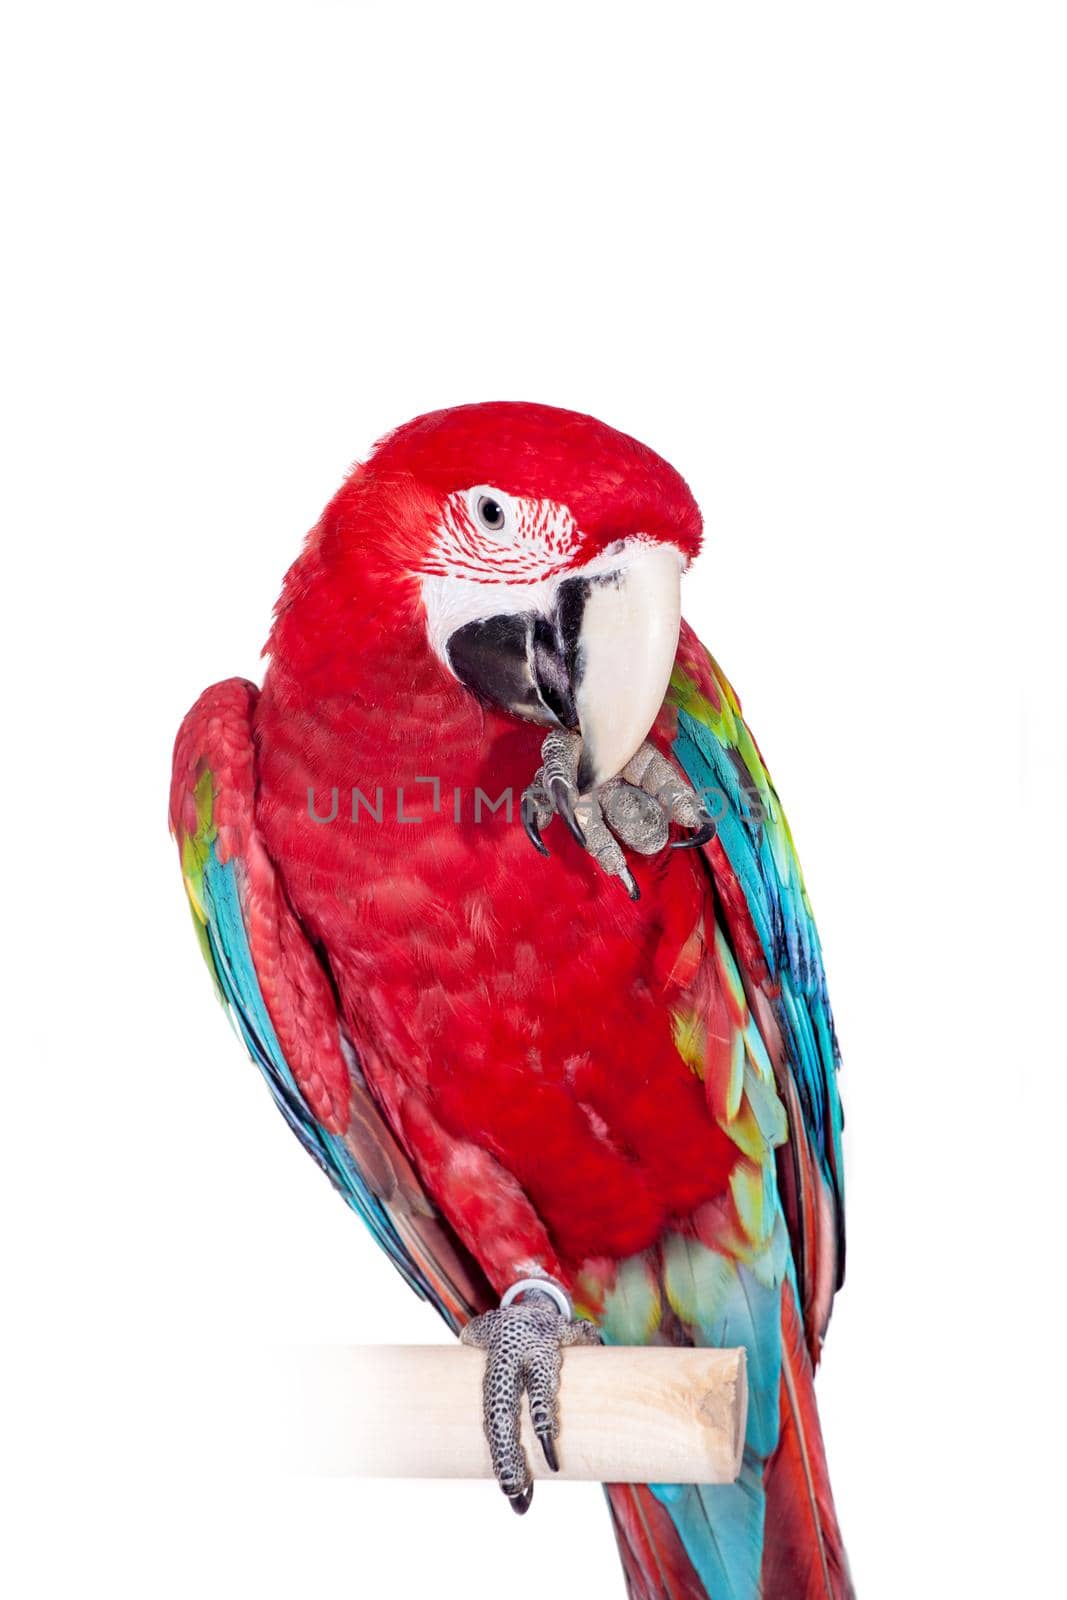 Red-and-green Macaw on white background by RosaJay